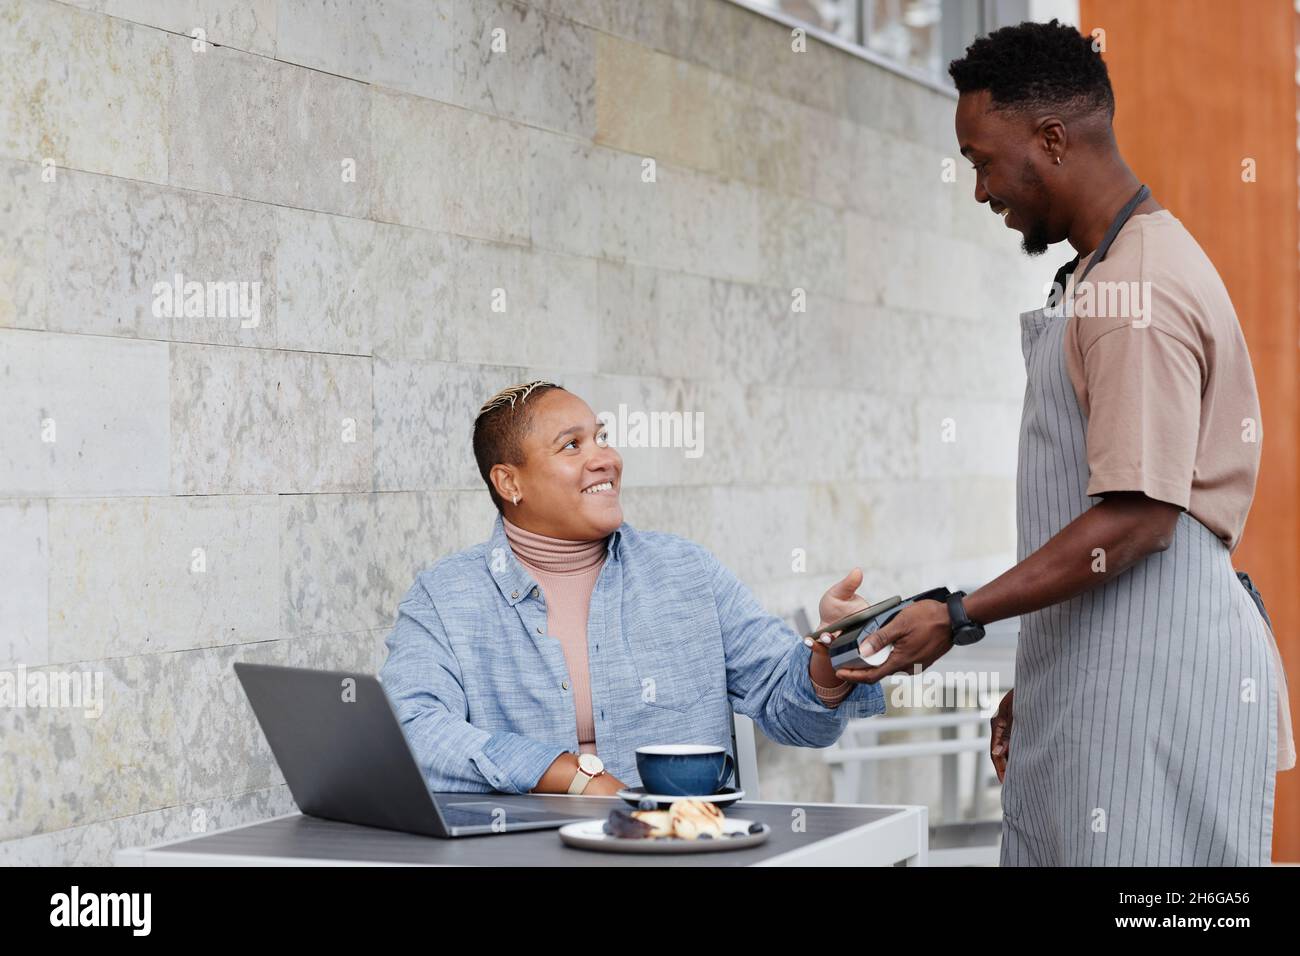 Joyful young Black woman sitting at table outdoor cafe paying for lunch using her smartphone Stock Photo